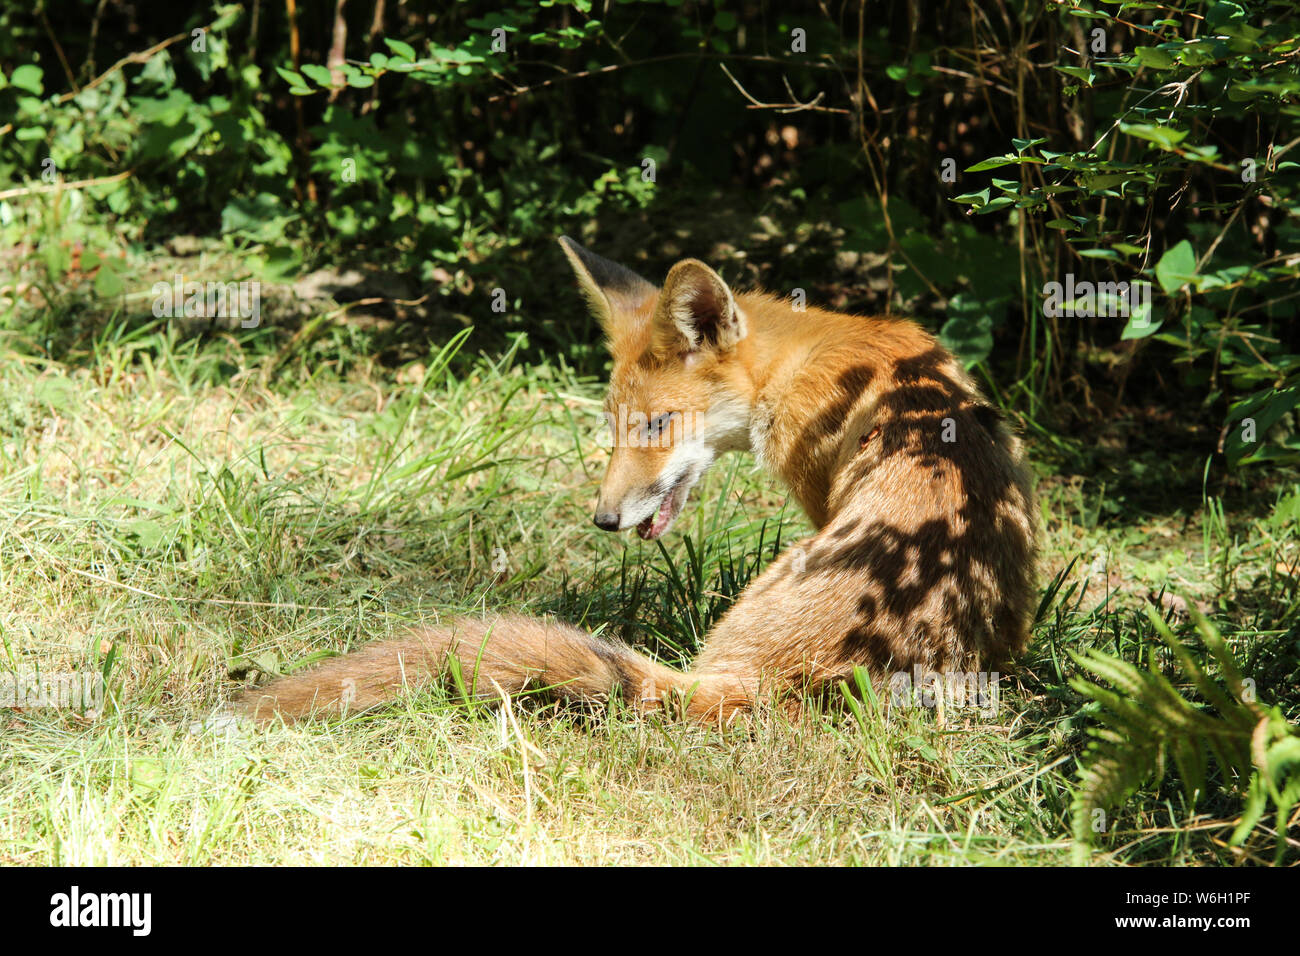 The thirsty or sick fox in the city park. Looking tired and dried. Stock Photo